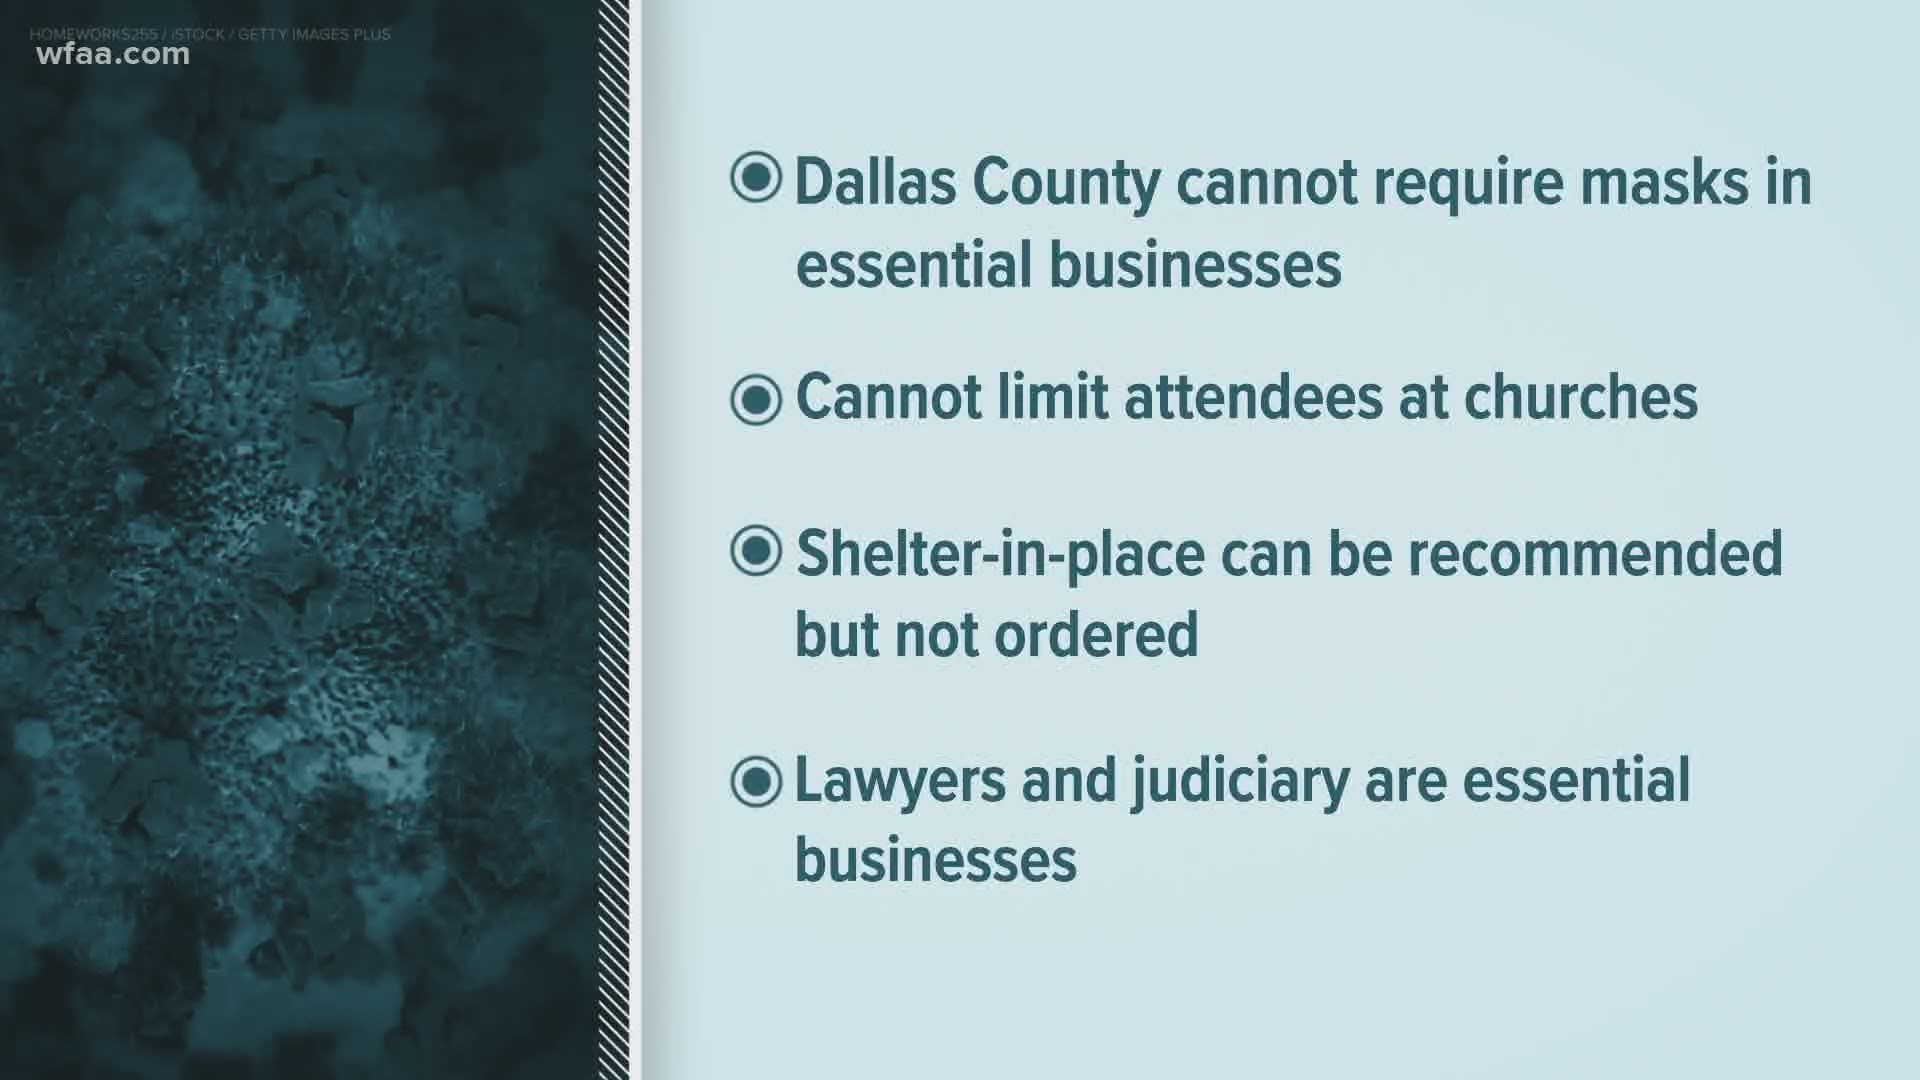 In a letter sent to Dallas County Judge Clay Jenkins, AG Ken Paxton said local orders can't be stricter than statewide executive orders.